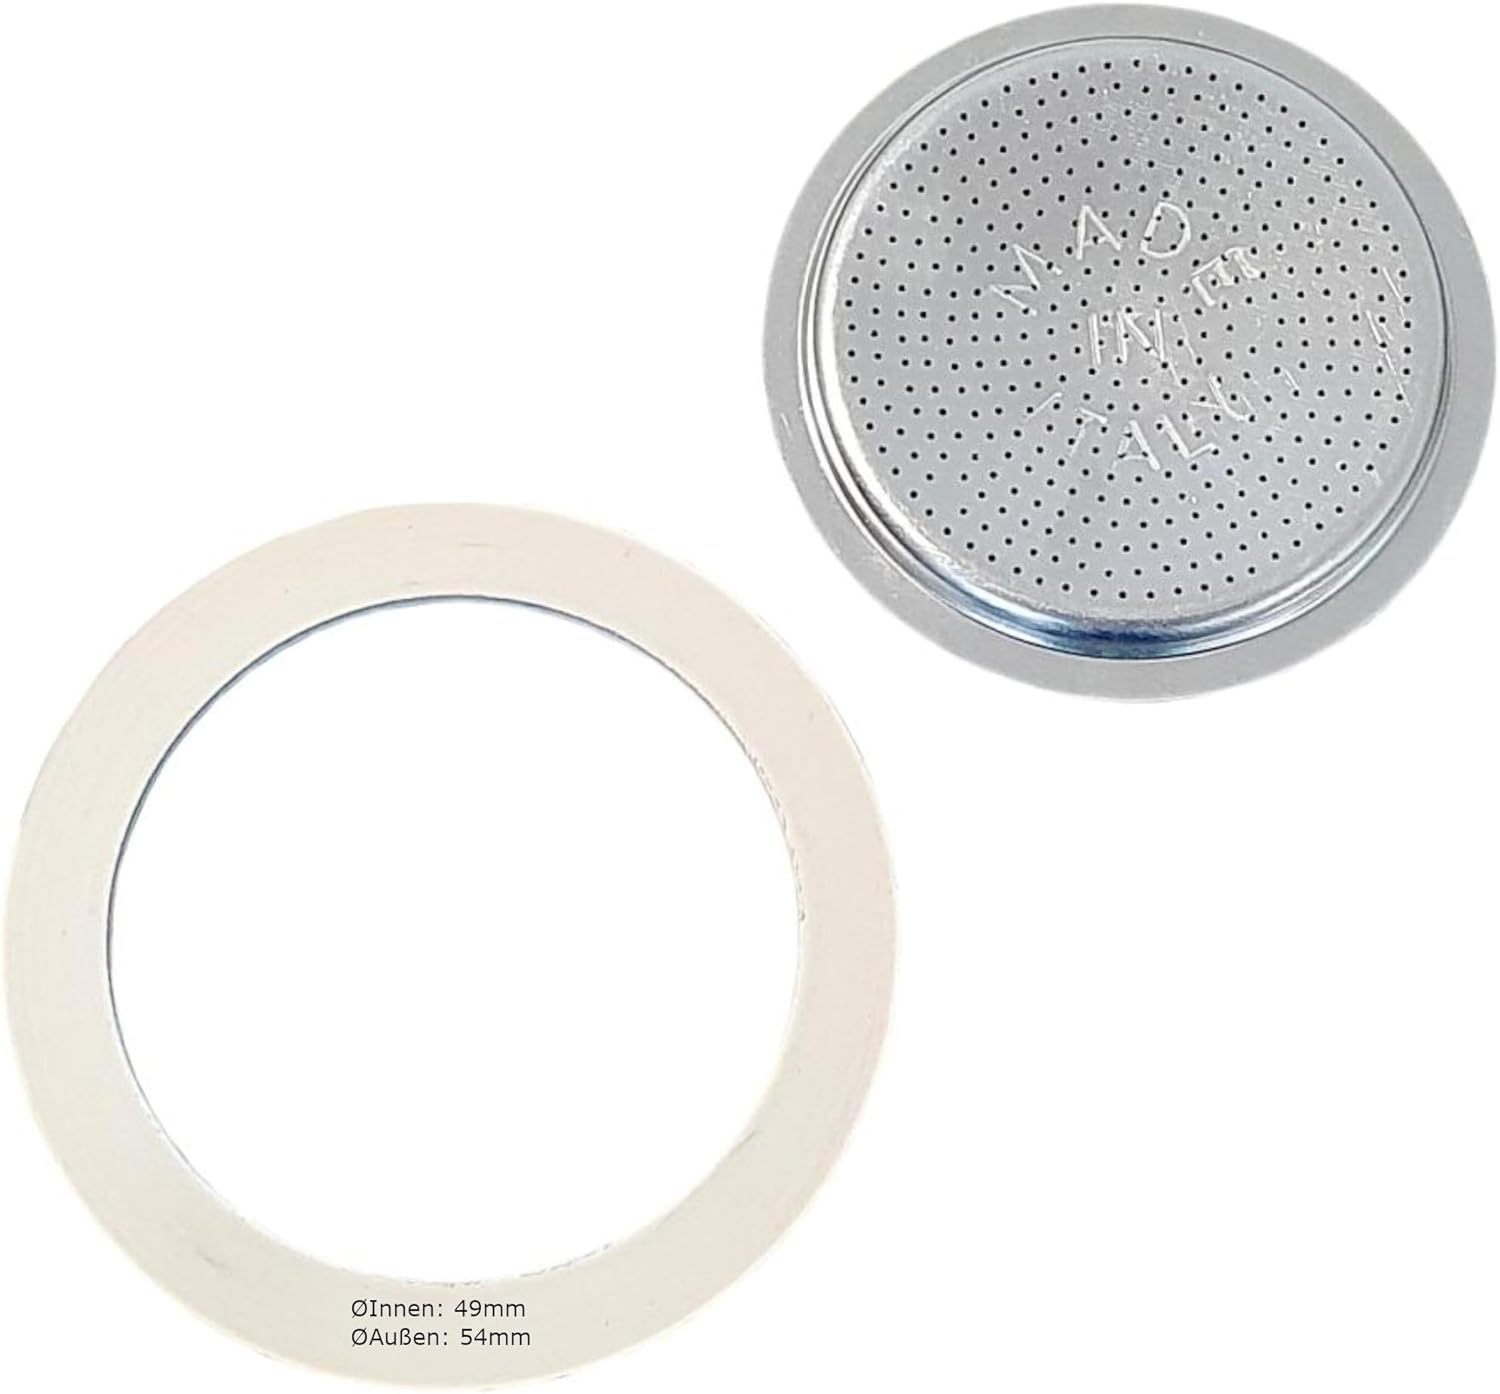 Harren24 Filter and Seal for Espresso Maker, Compatible with Bialetti Espresso Pot for 2 Cups, Outer Diameter 54 mm, 5.4 cm, inner diameter 49 mm, 4.9 cm, replacement Seal, Sealing Ring